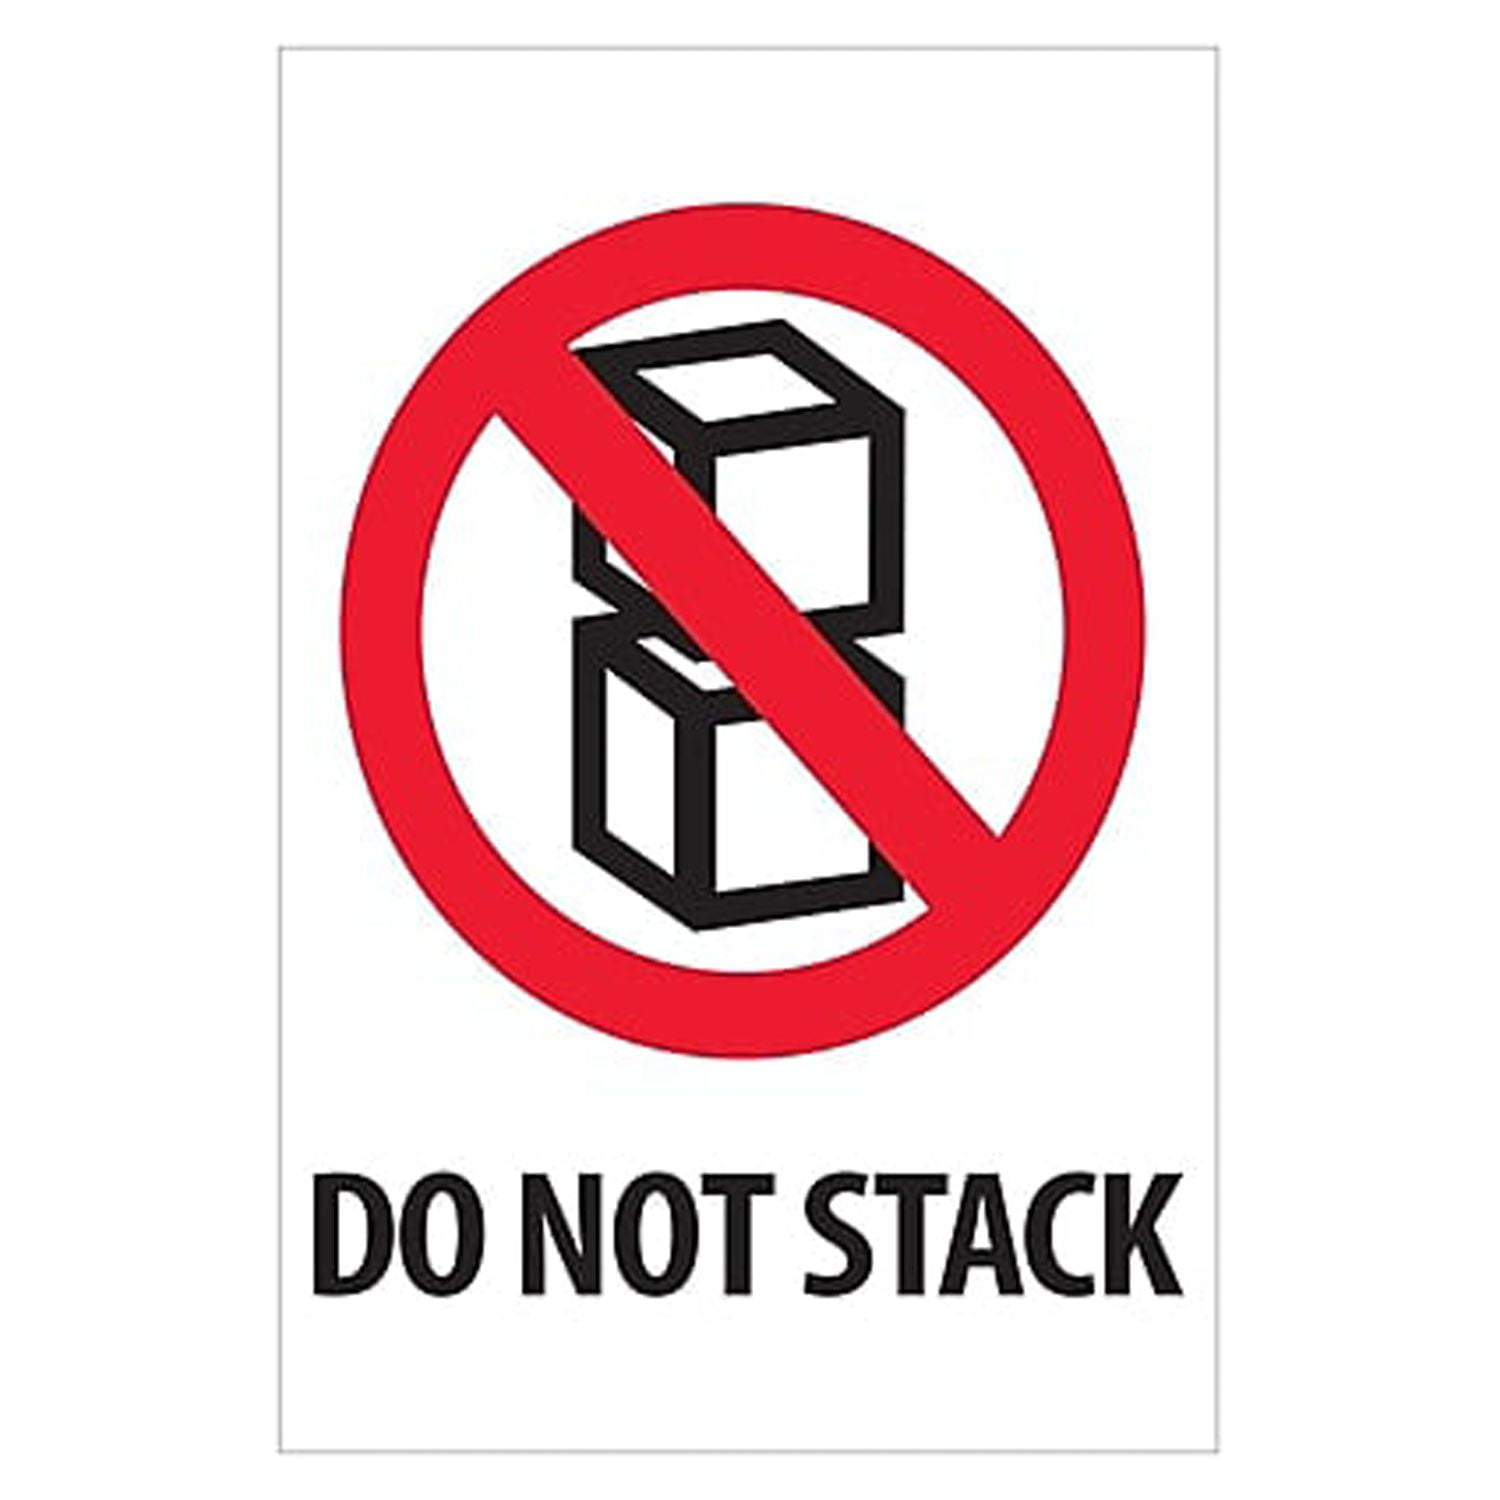 Ipm502 4 X 6 In. Do Not Stack Labels